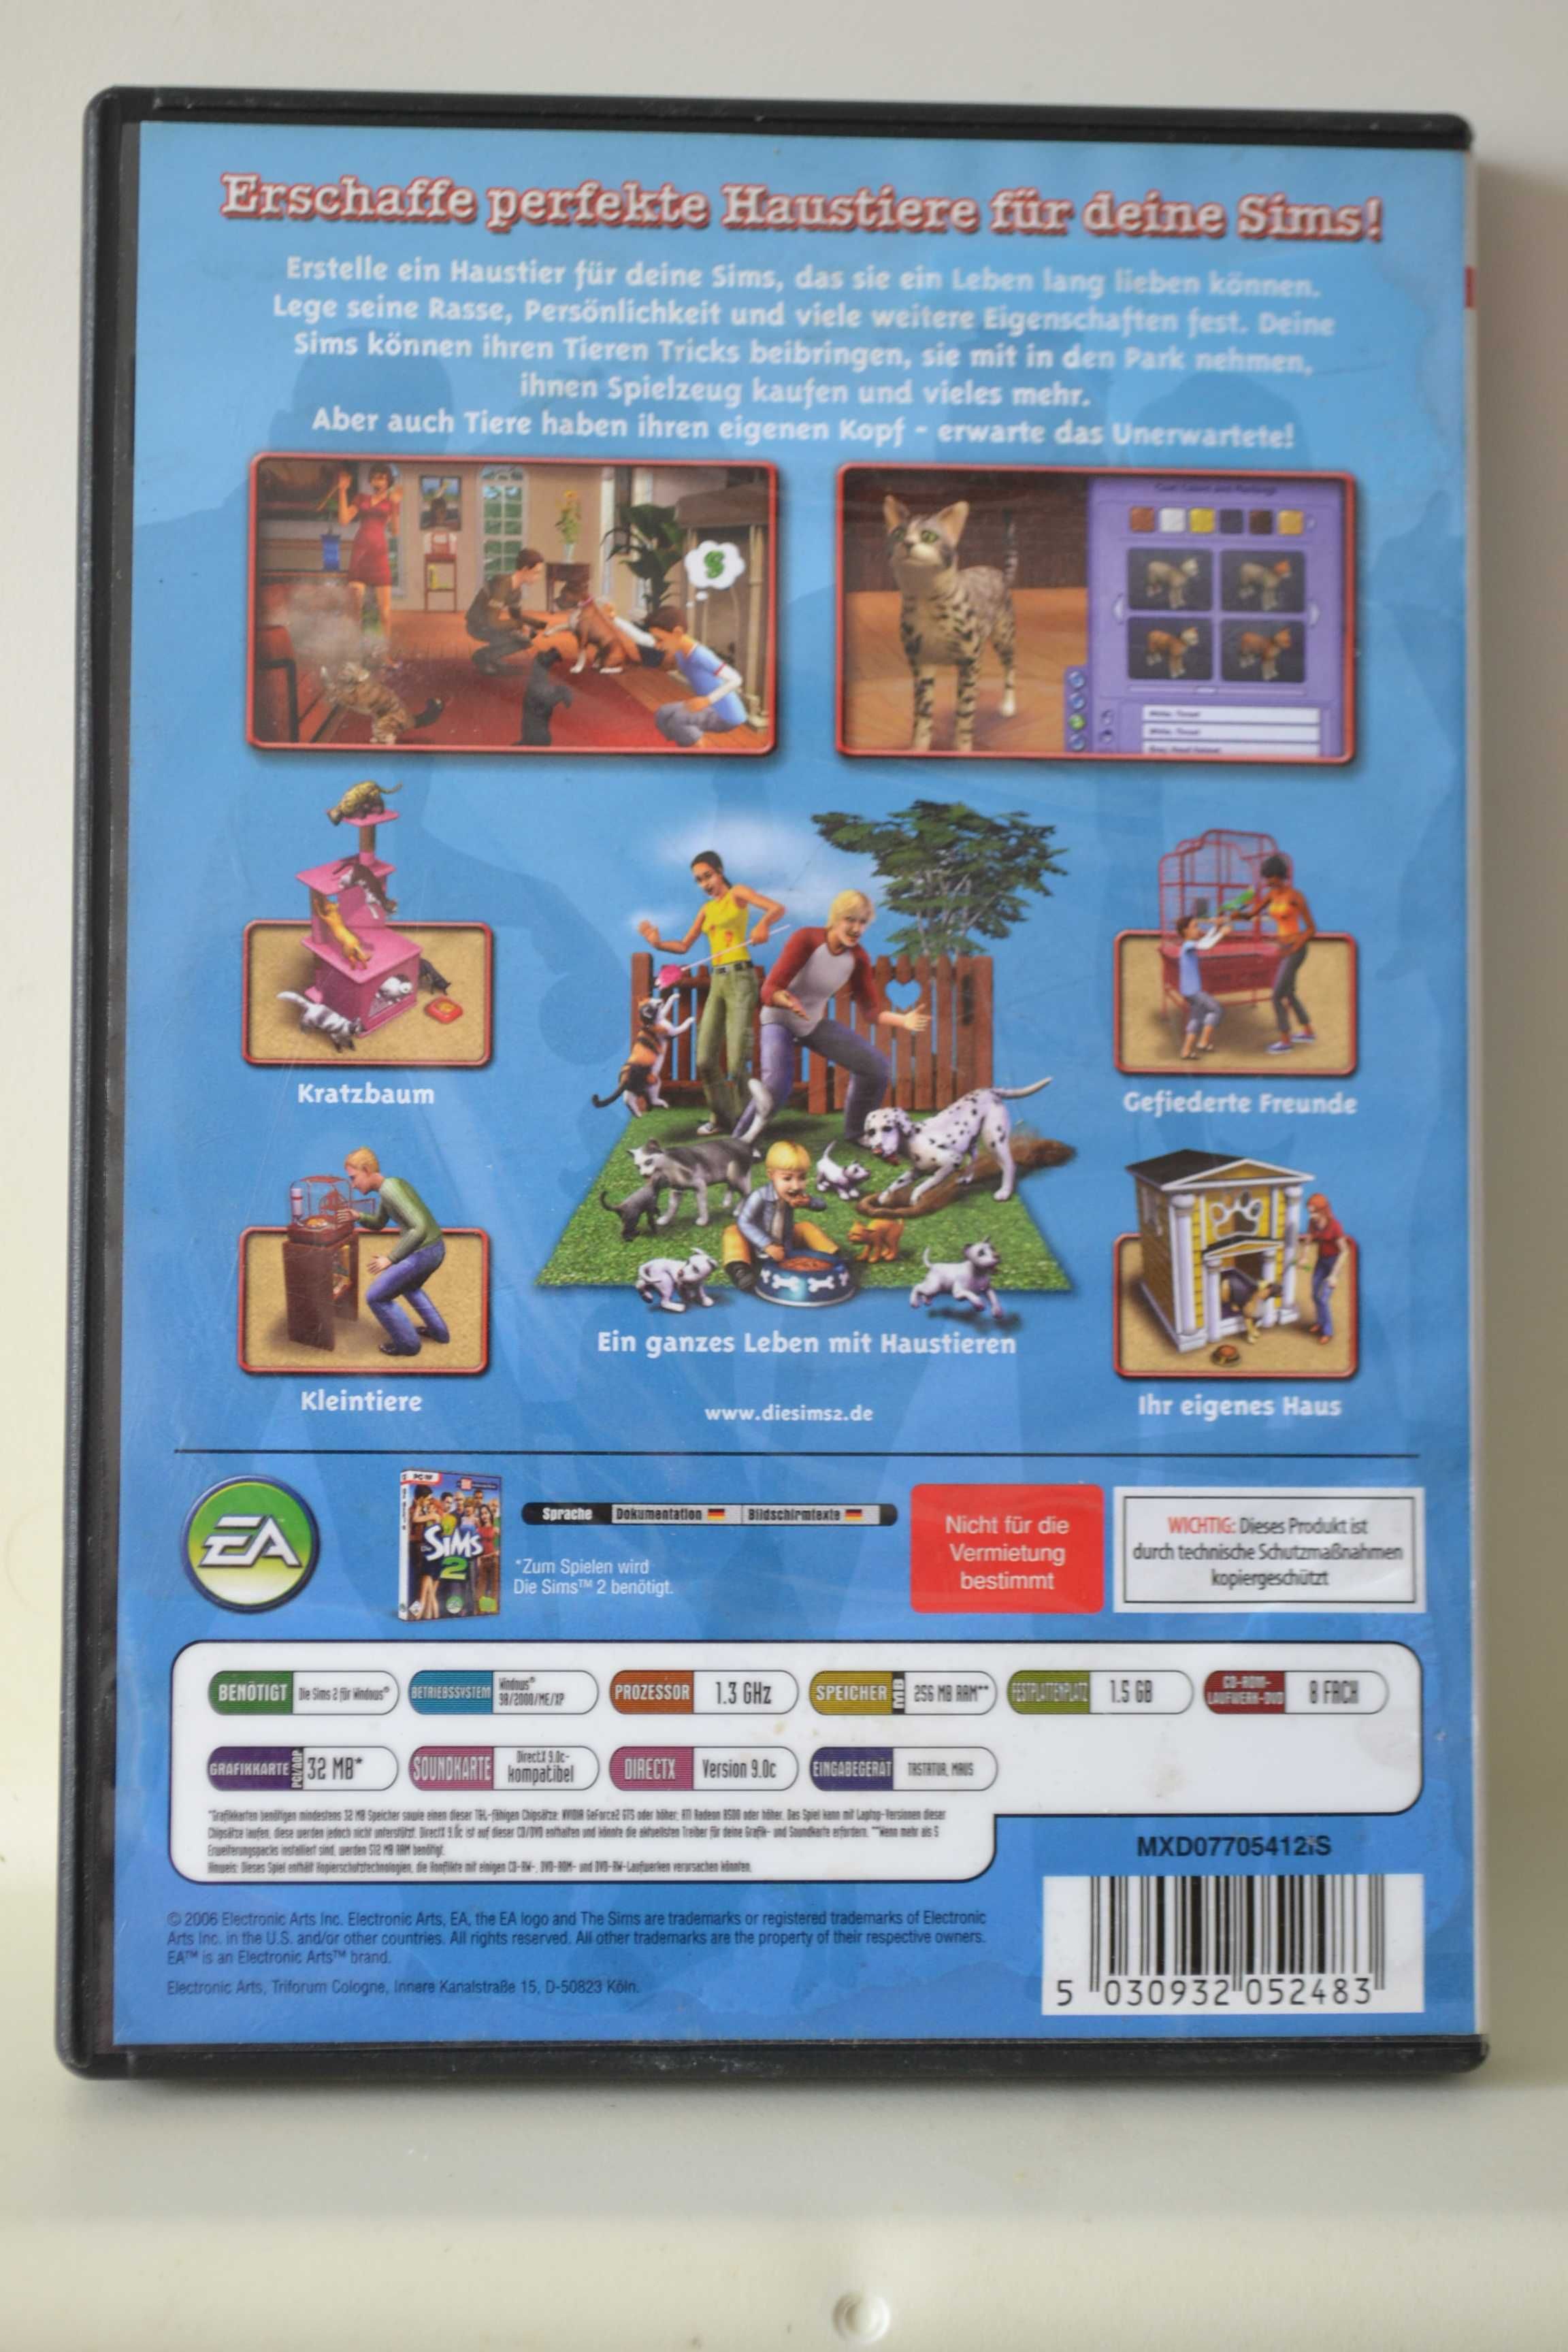 The Sims 2 Haustiere  PC